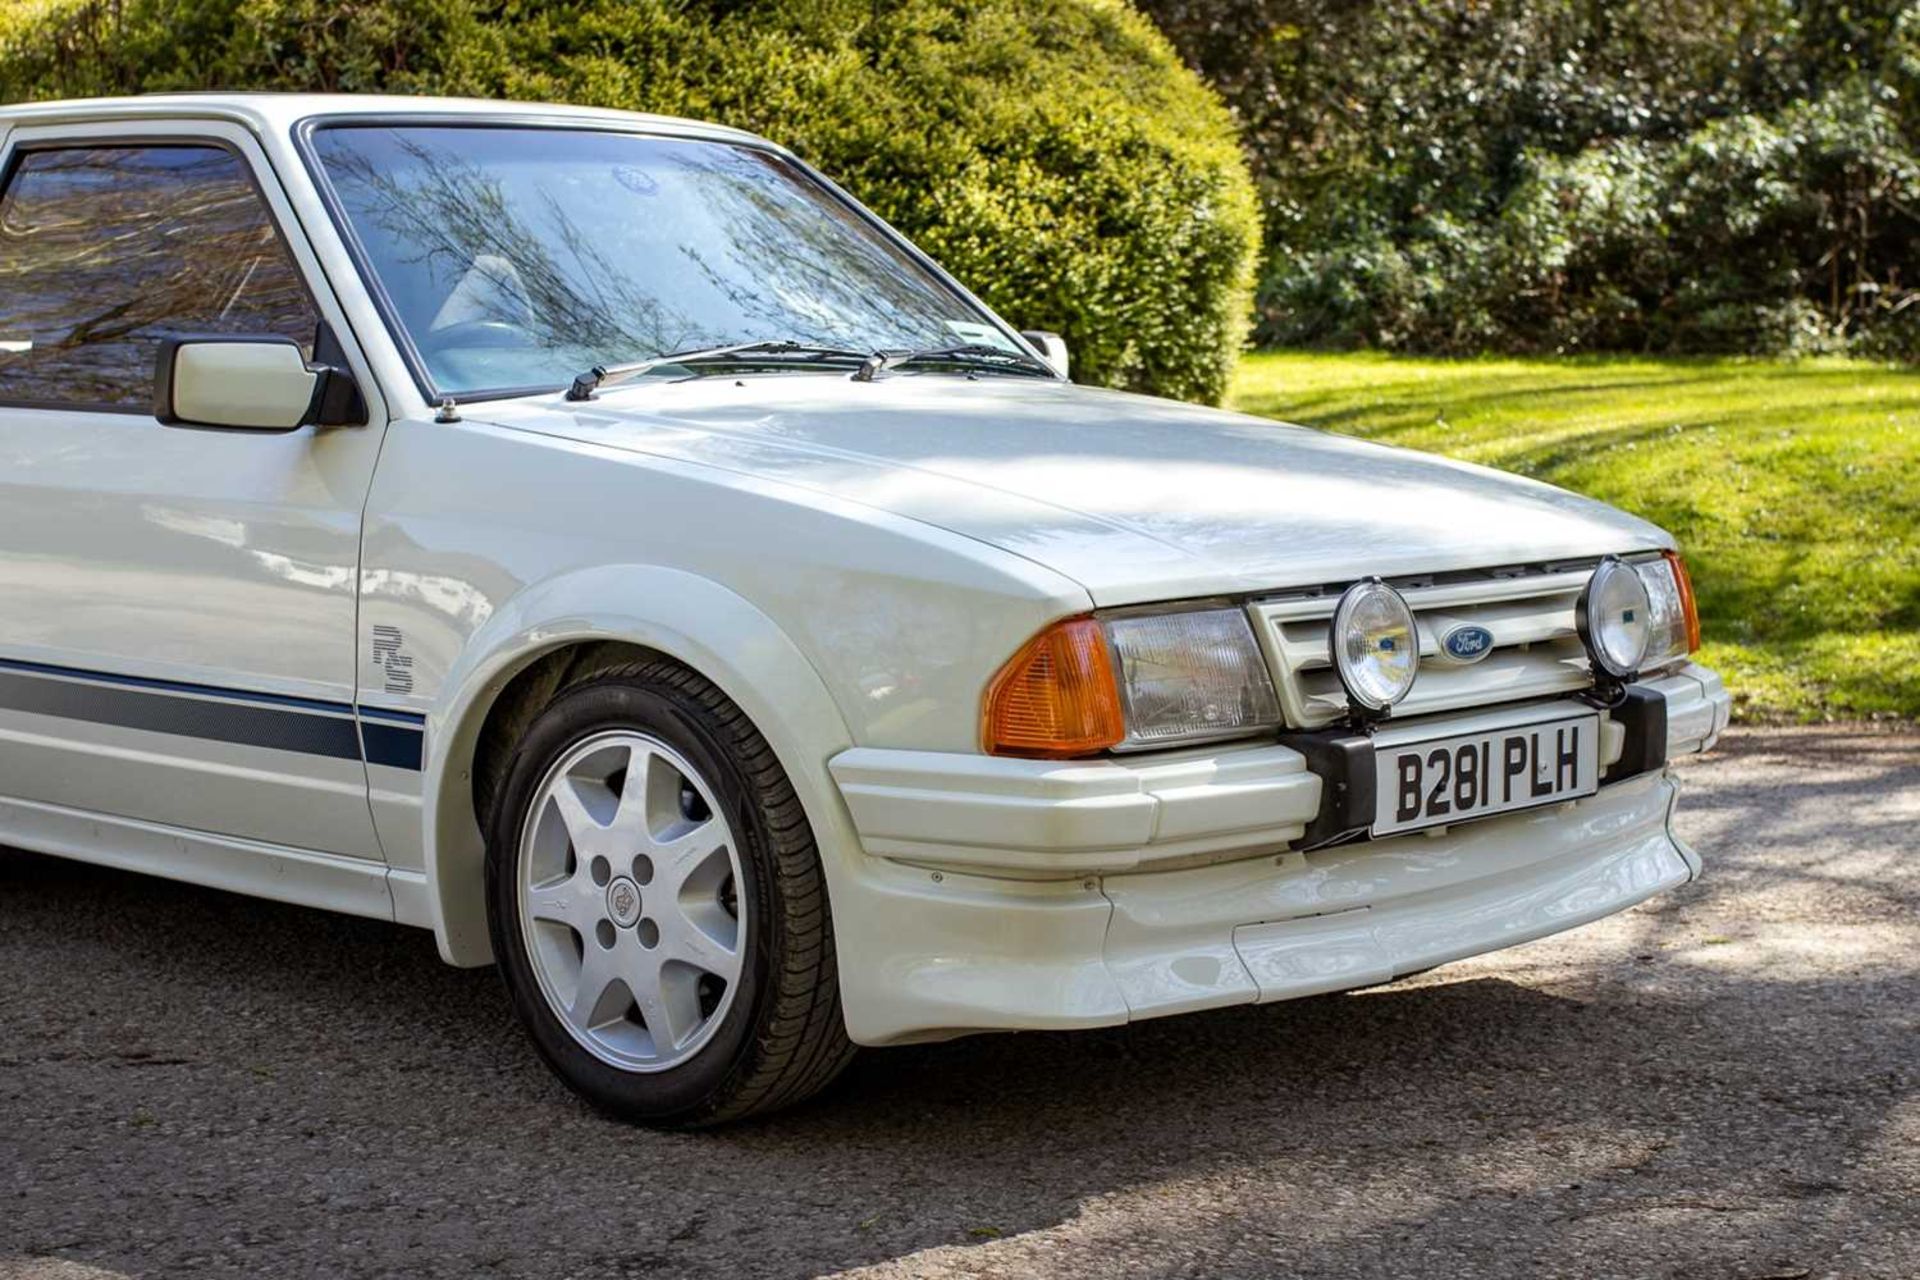 1985 Ford Escort RS Turbo S1 Subject to a full restoration  - Image 33 of 76